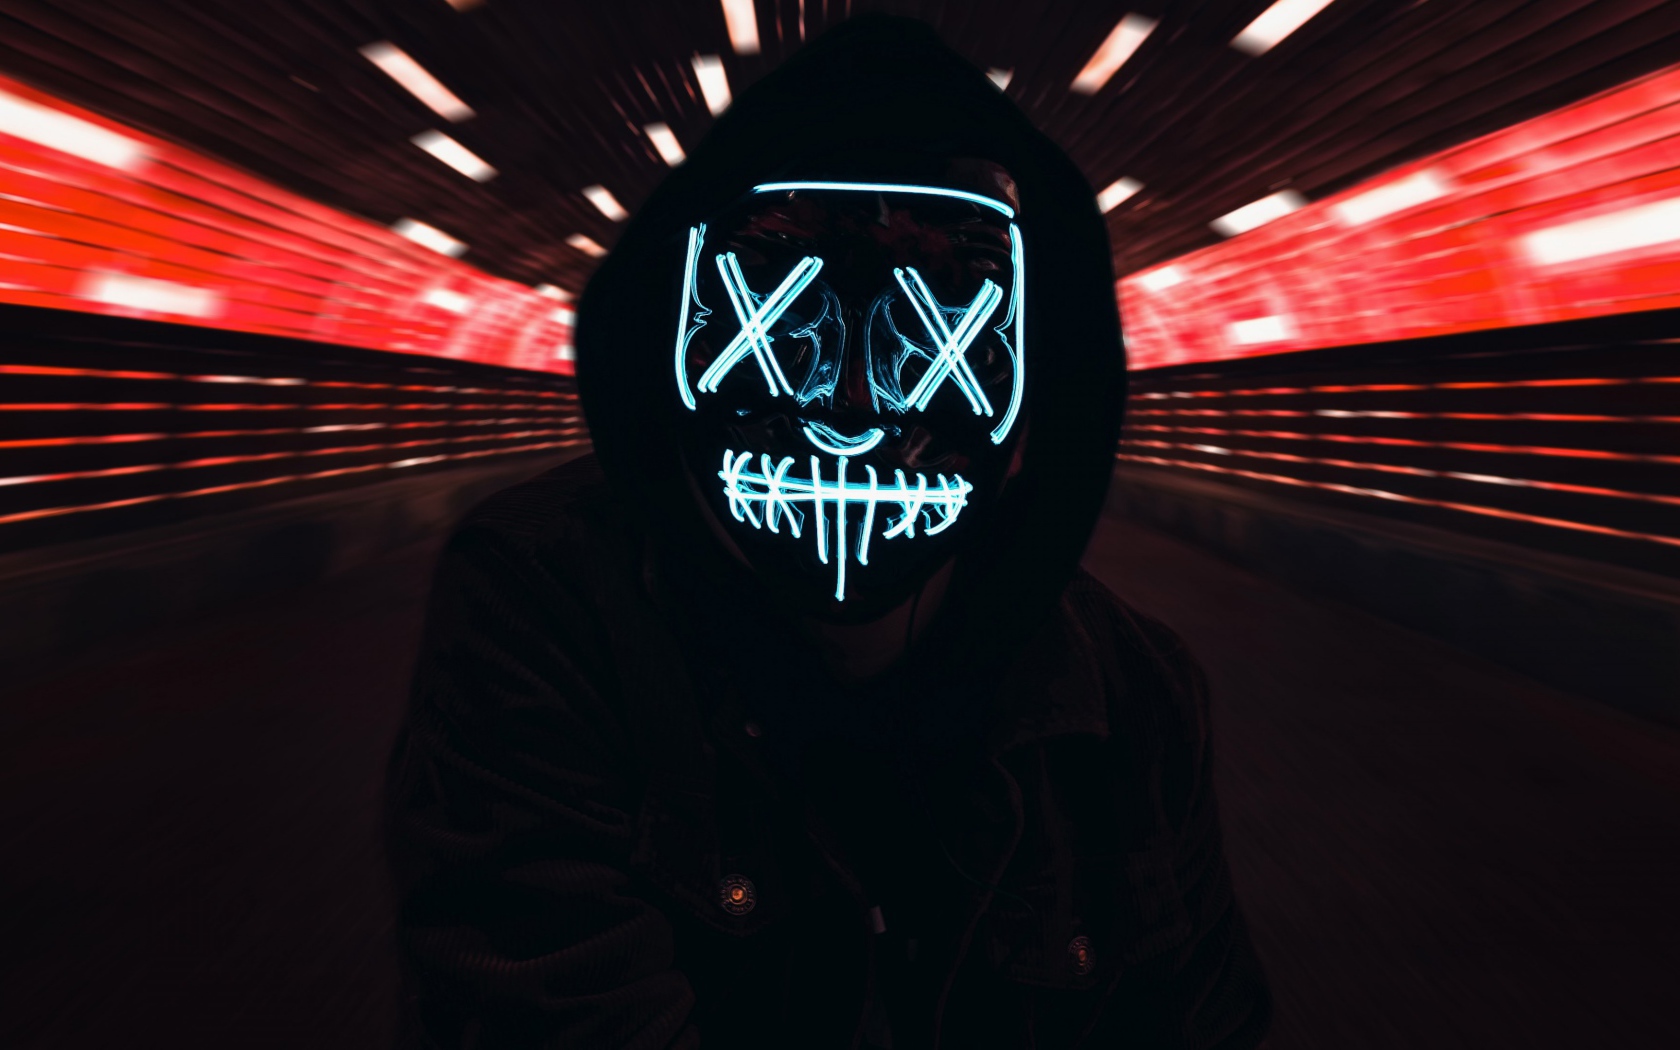 The guy in the black jacket in the neon mask of anonymous on his face